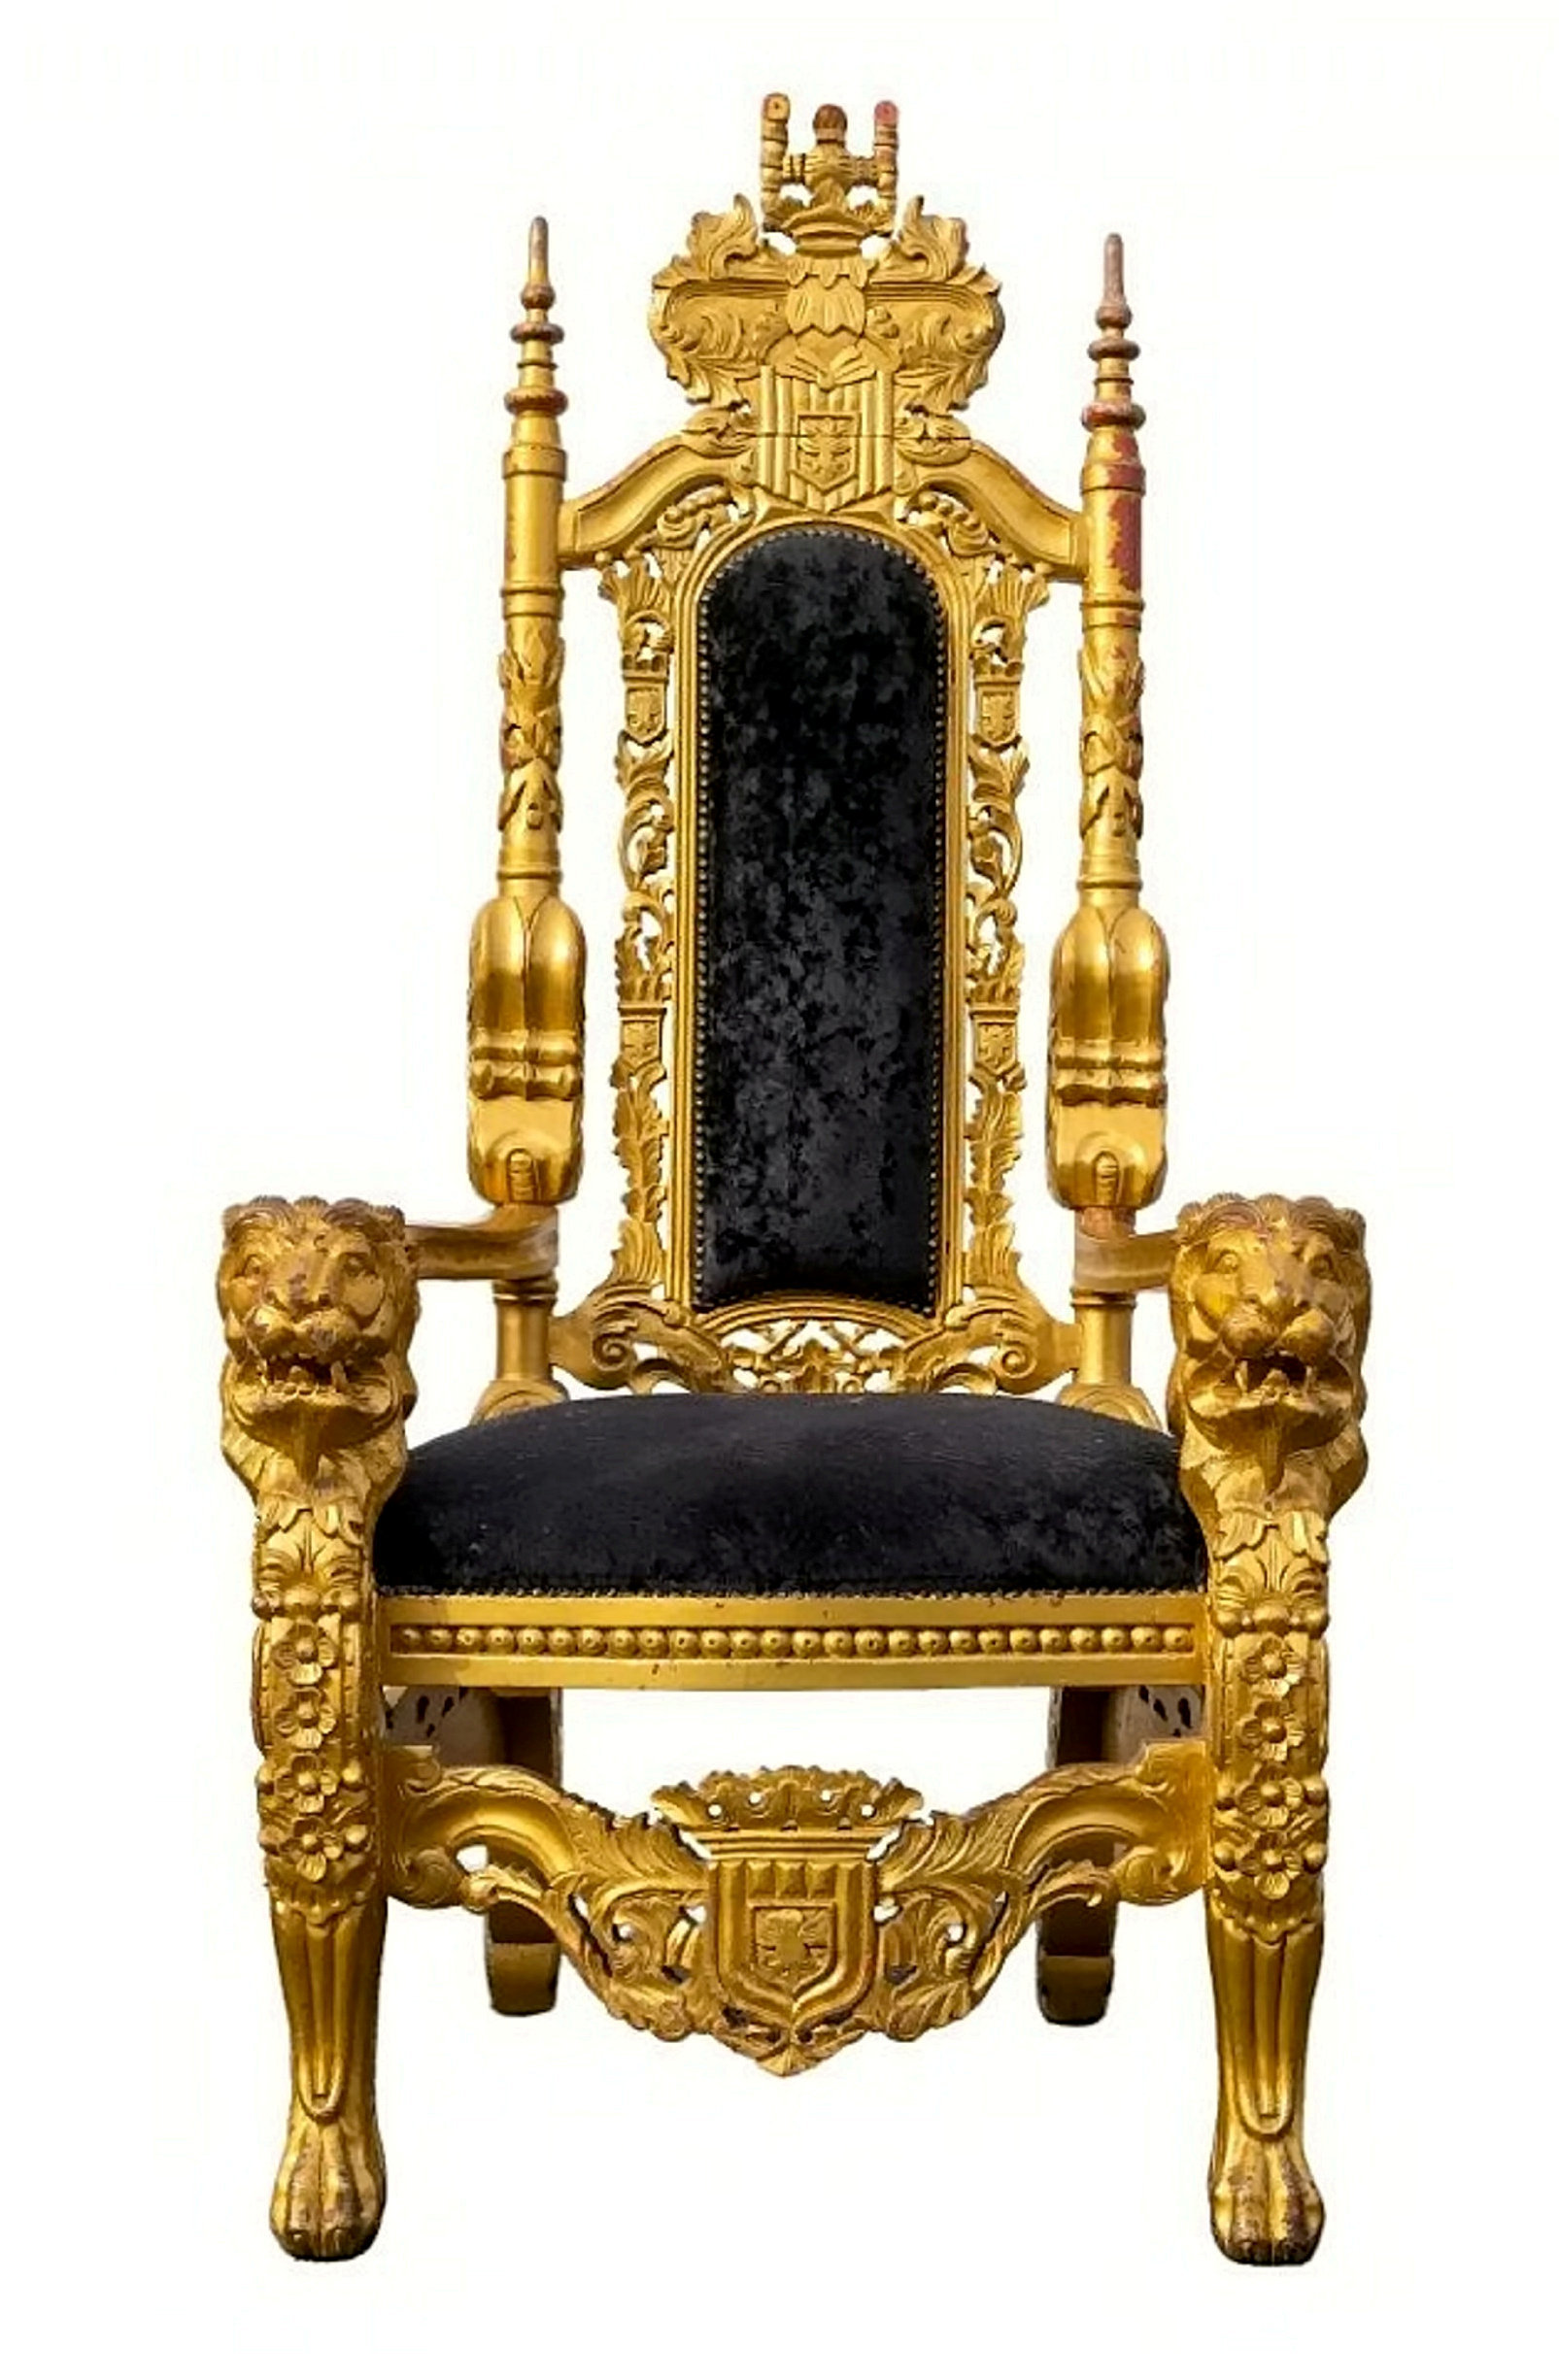 His throne has now been sold for £4,000 (SWNS)